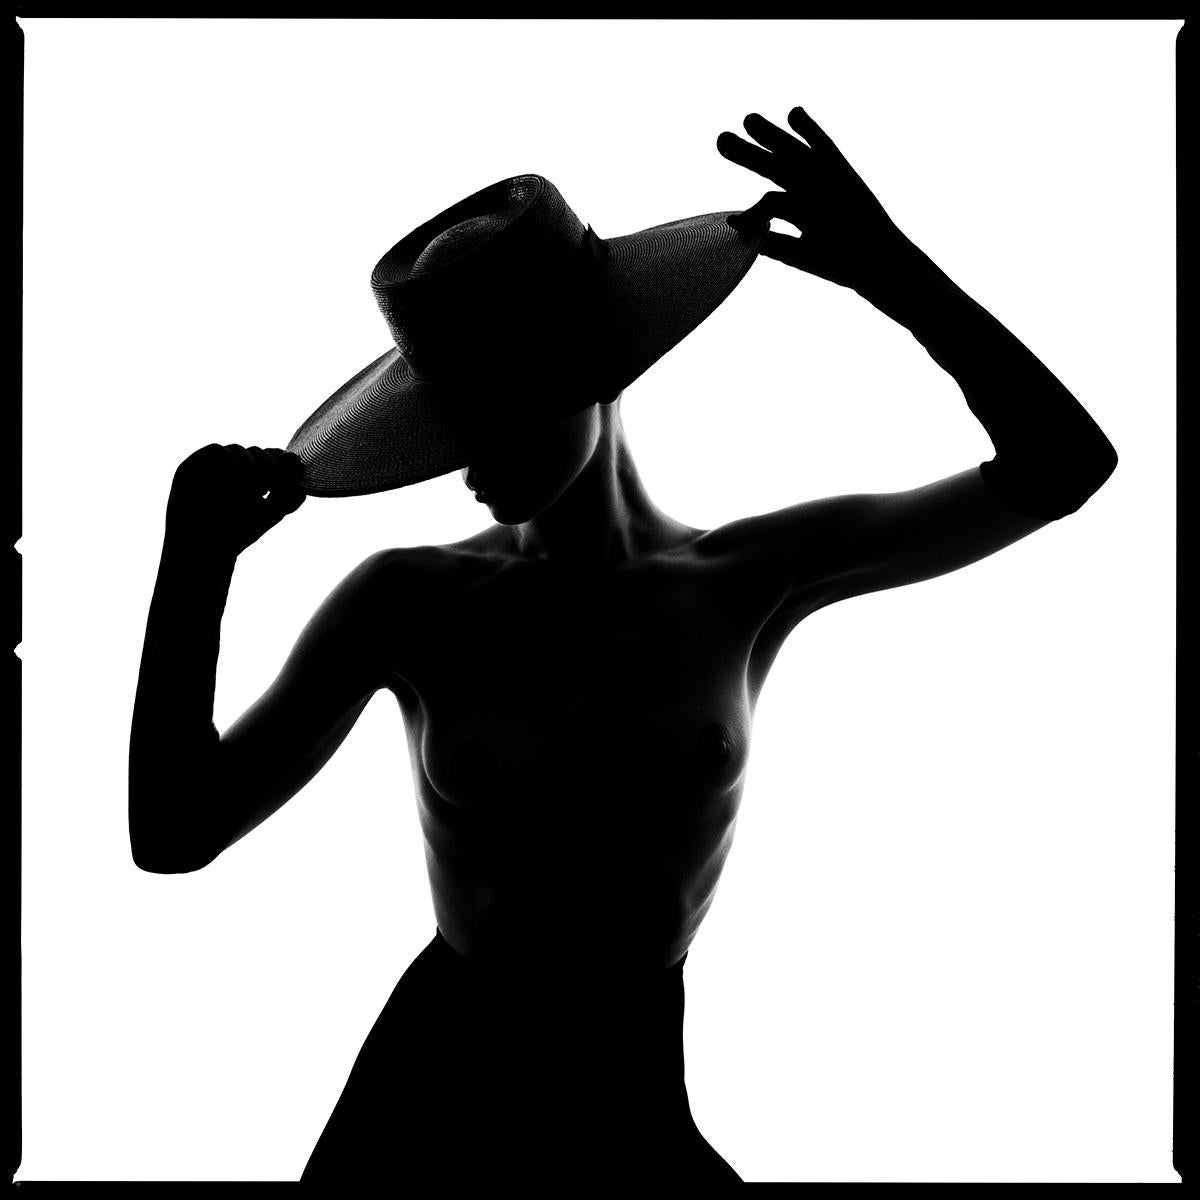 Tyler Shields Nude Photograph - "Hat Silhouette" Sexy Nude Woman